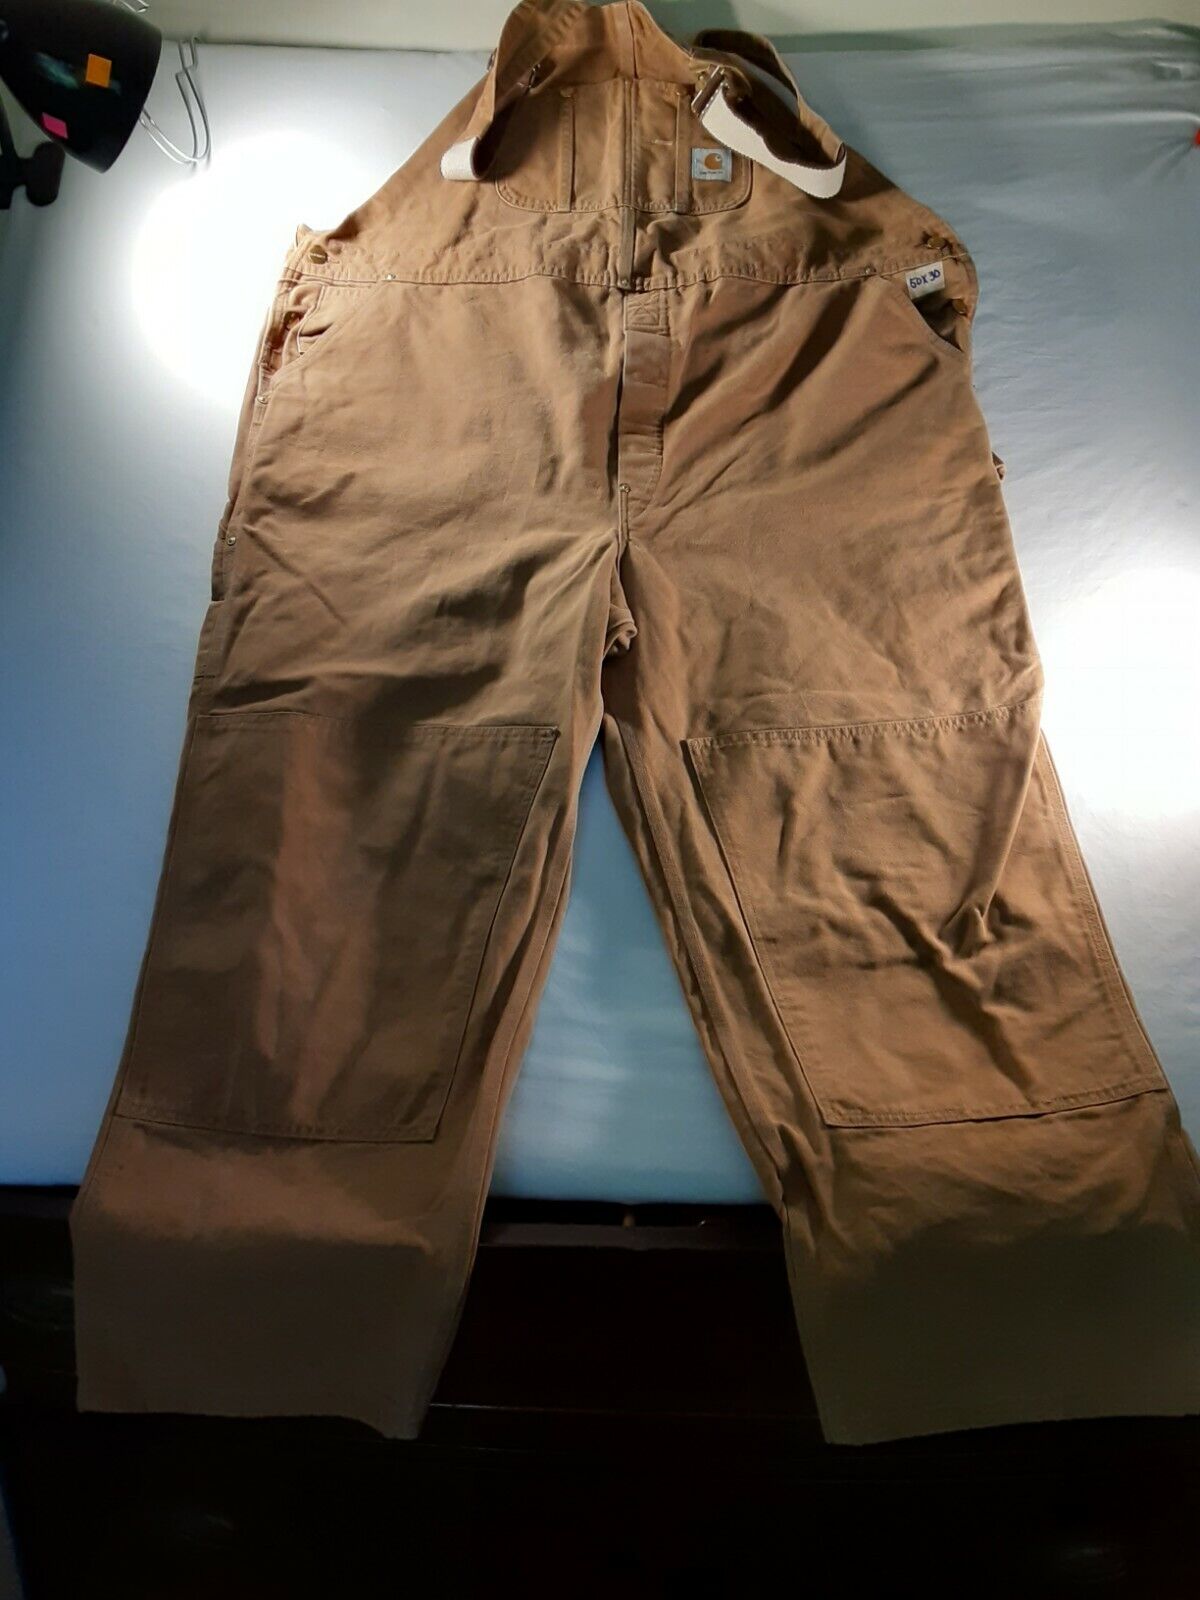 carhartt Raleigh Mall tan Max 87% OFF 50x30 overalls